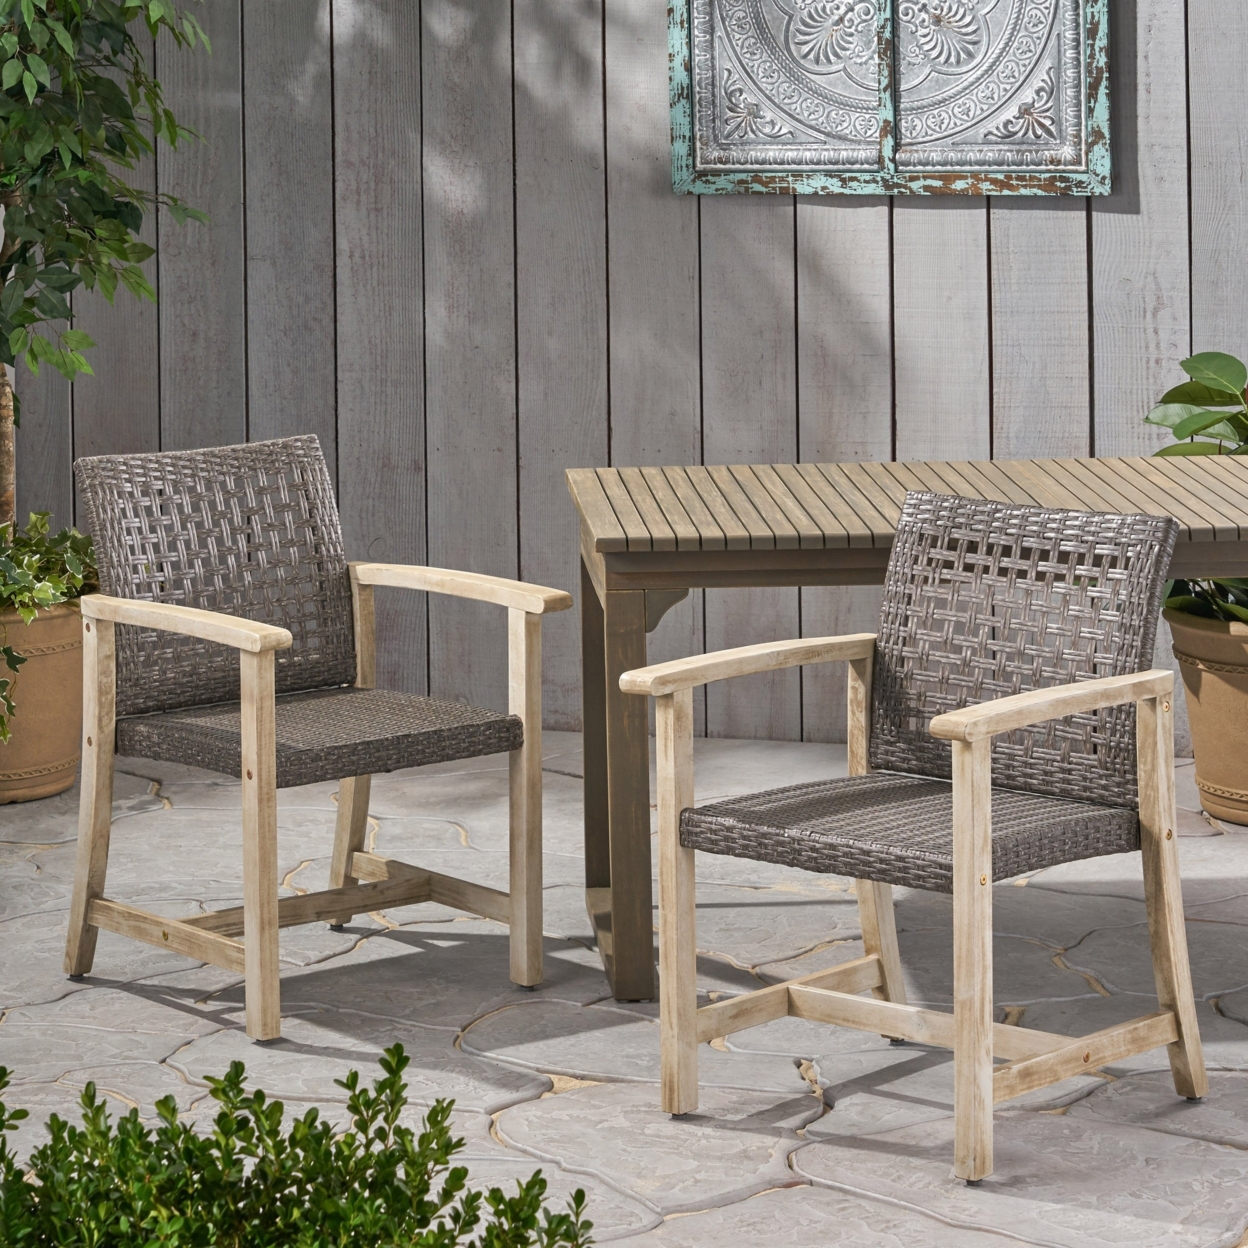 GDF Studio Beacher Outdoor Acacia Wood and Wicker Dining Chair (Set of 2), Light Gray Wash and Mix Black - image 1 of 11